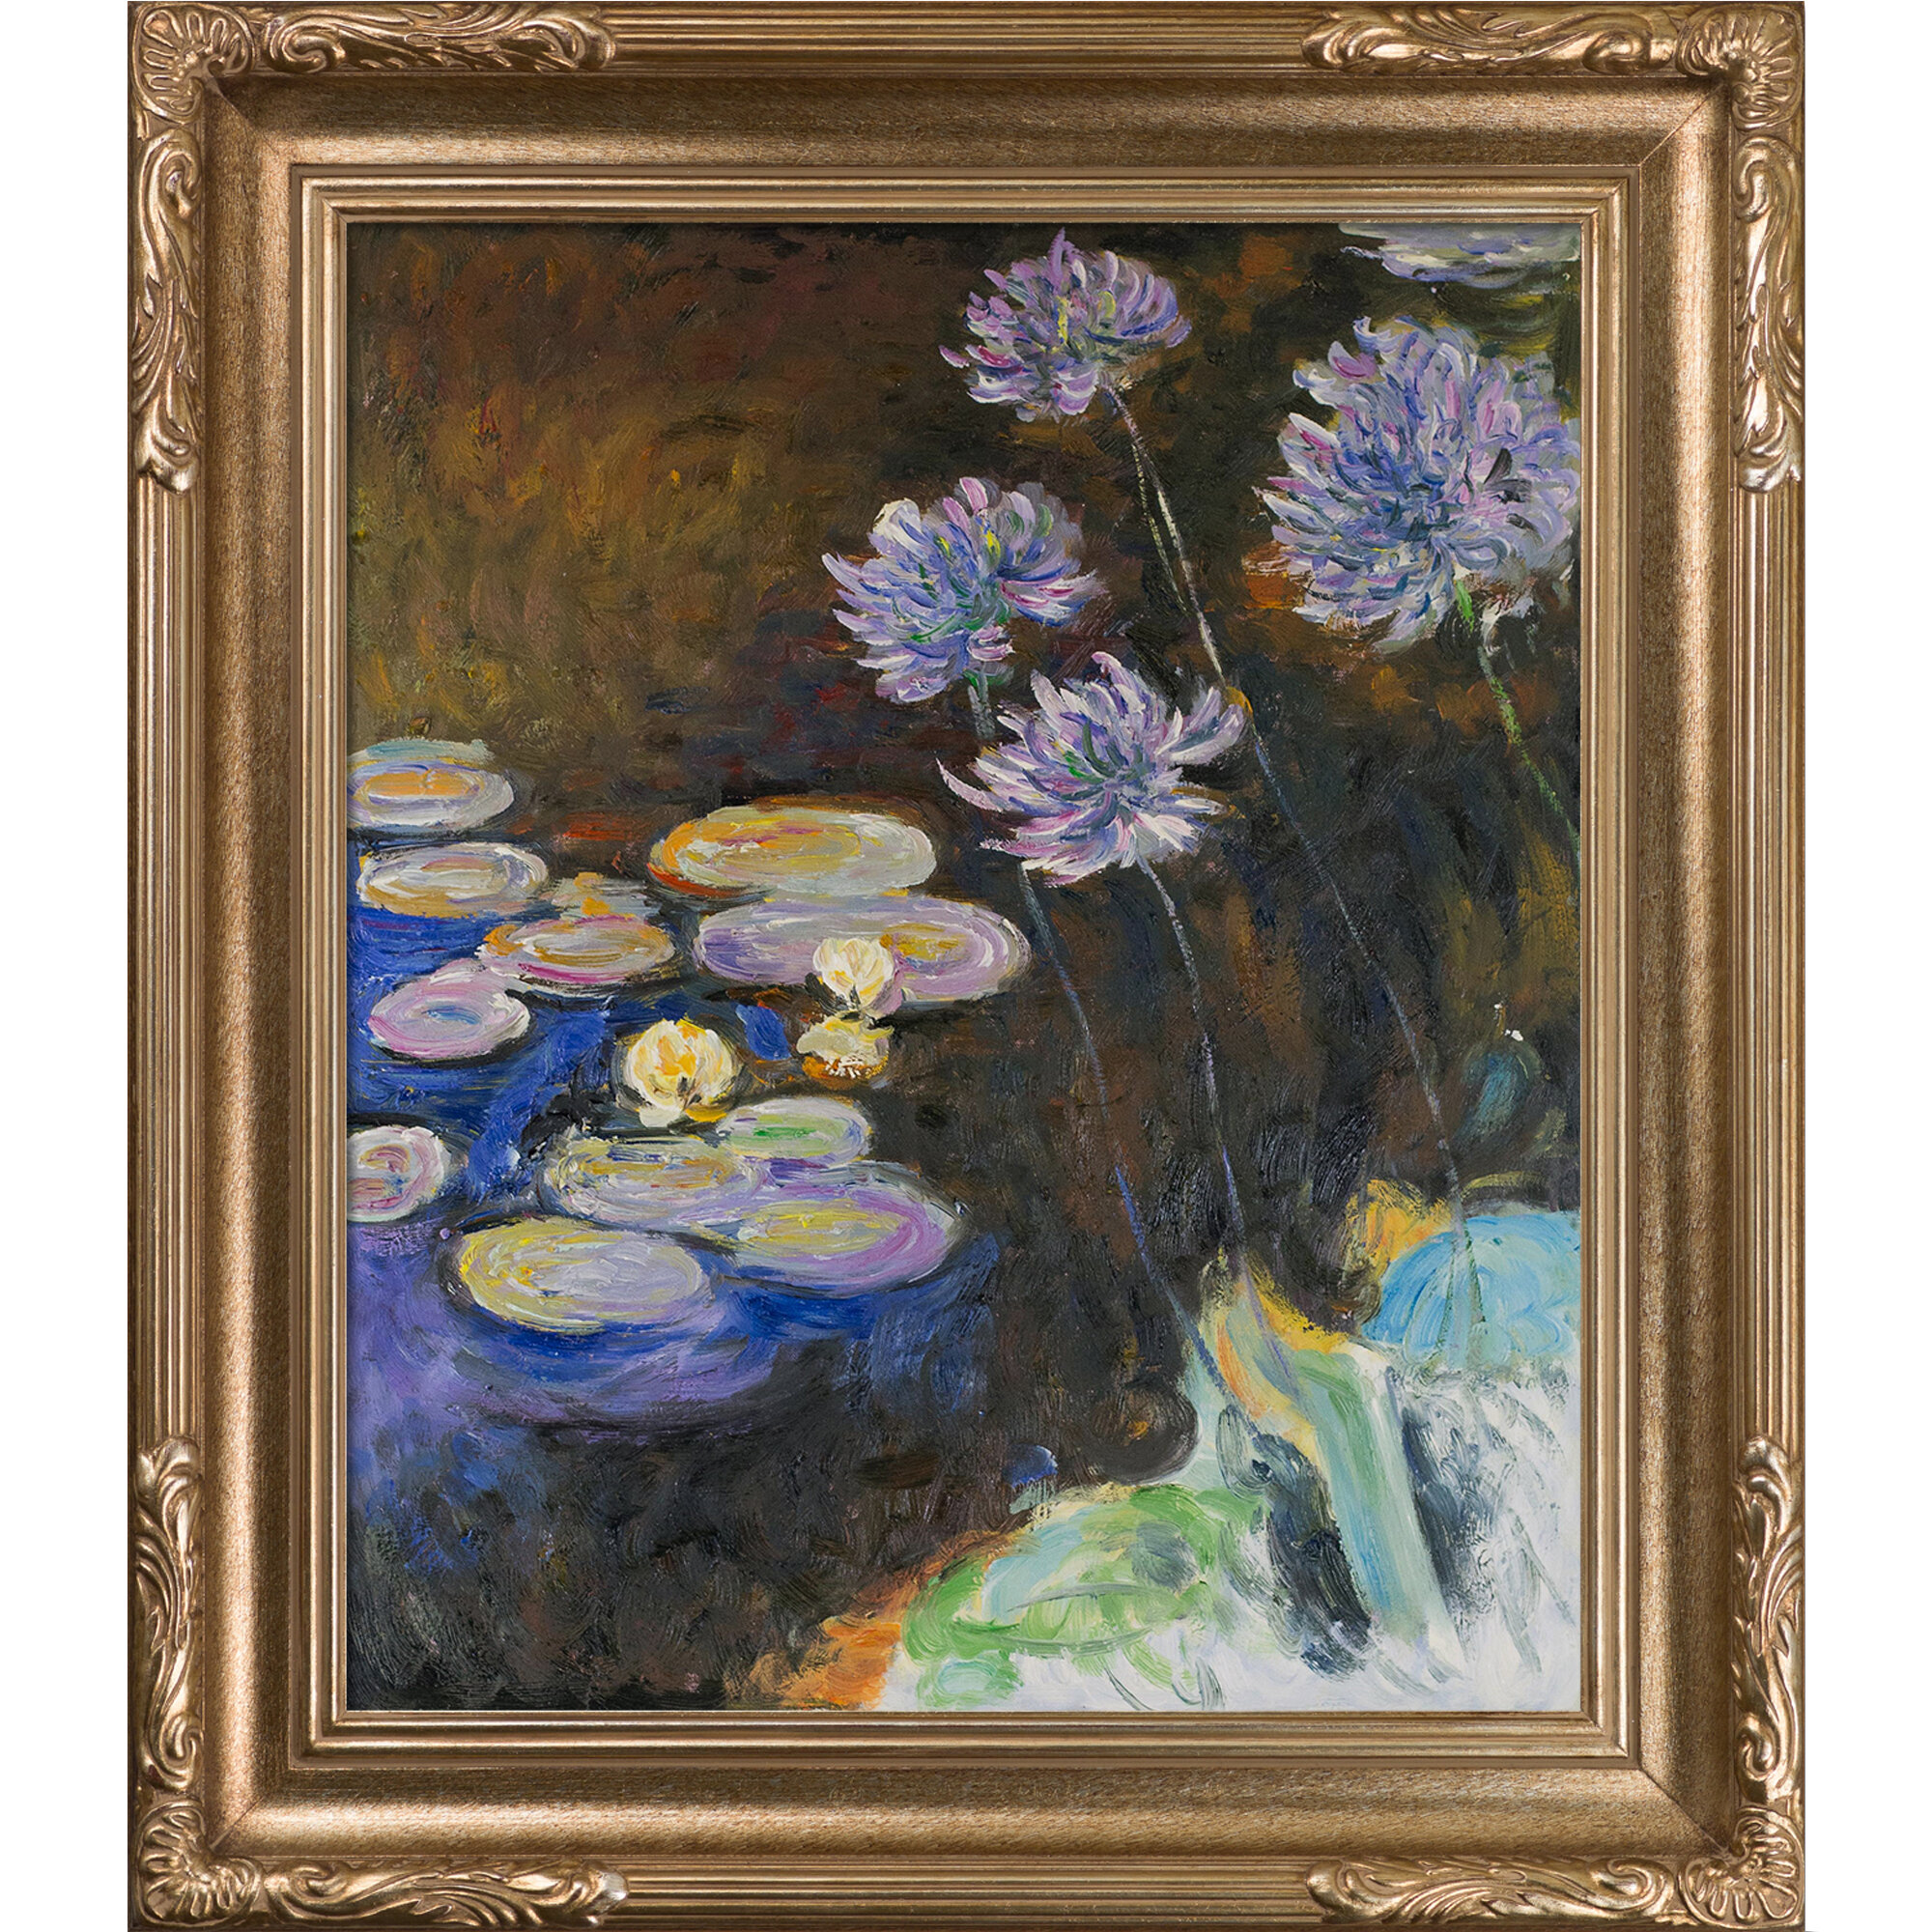 Water Lilies by Claude Monet Handmade Oil Painting Reproduction on Canvas 